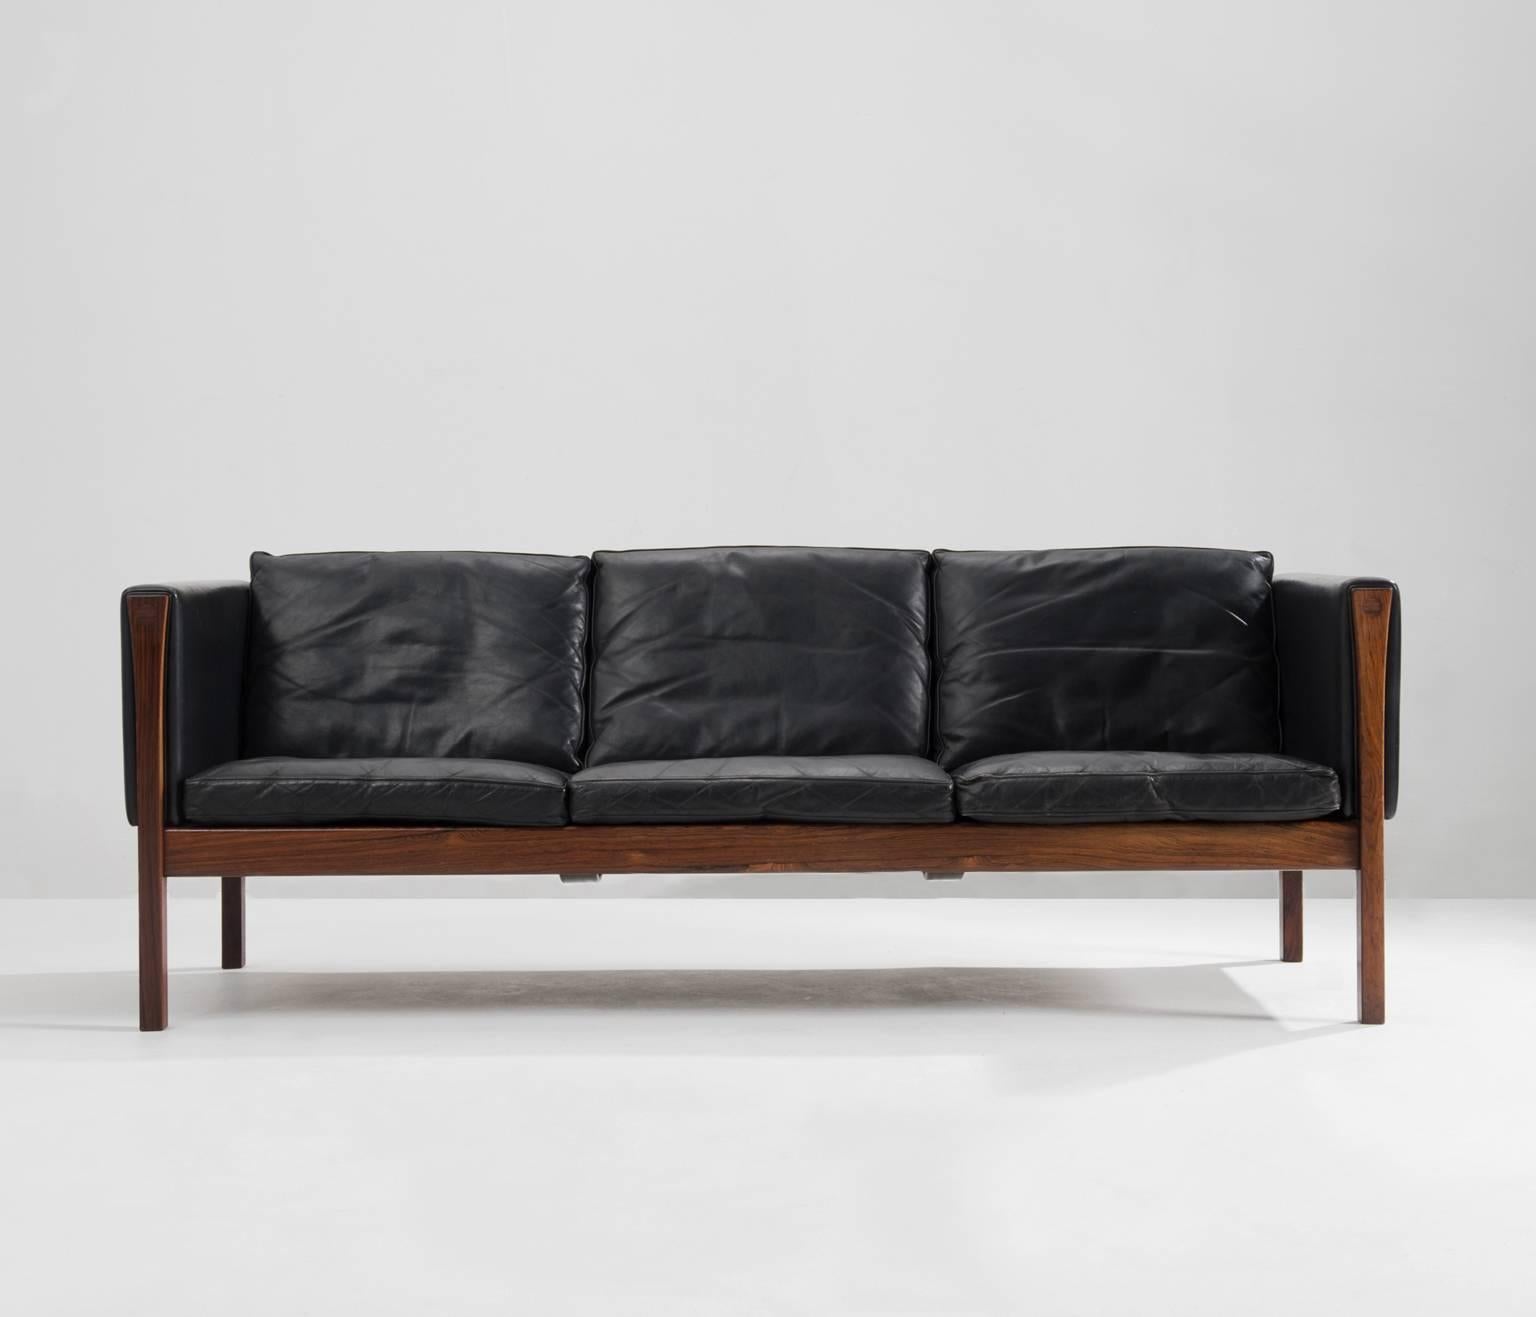 Fatastic Hans J. Wegner 3 seater sofa AP62 in black leather and rosewood, Denmark 
 
Excellent designed sofa by Hans Wegner, originally produced by AP Stolen. 
The straight lines of this iconic design shows an amazing elegance. The solid rosewood